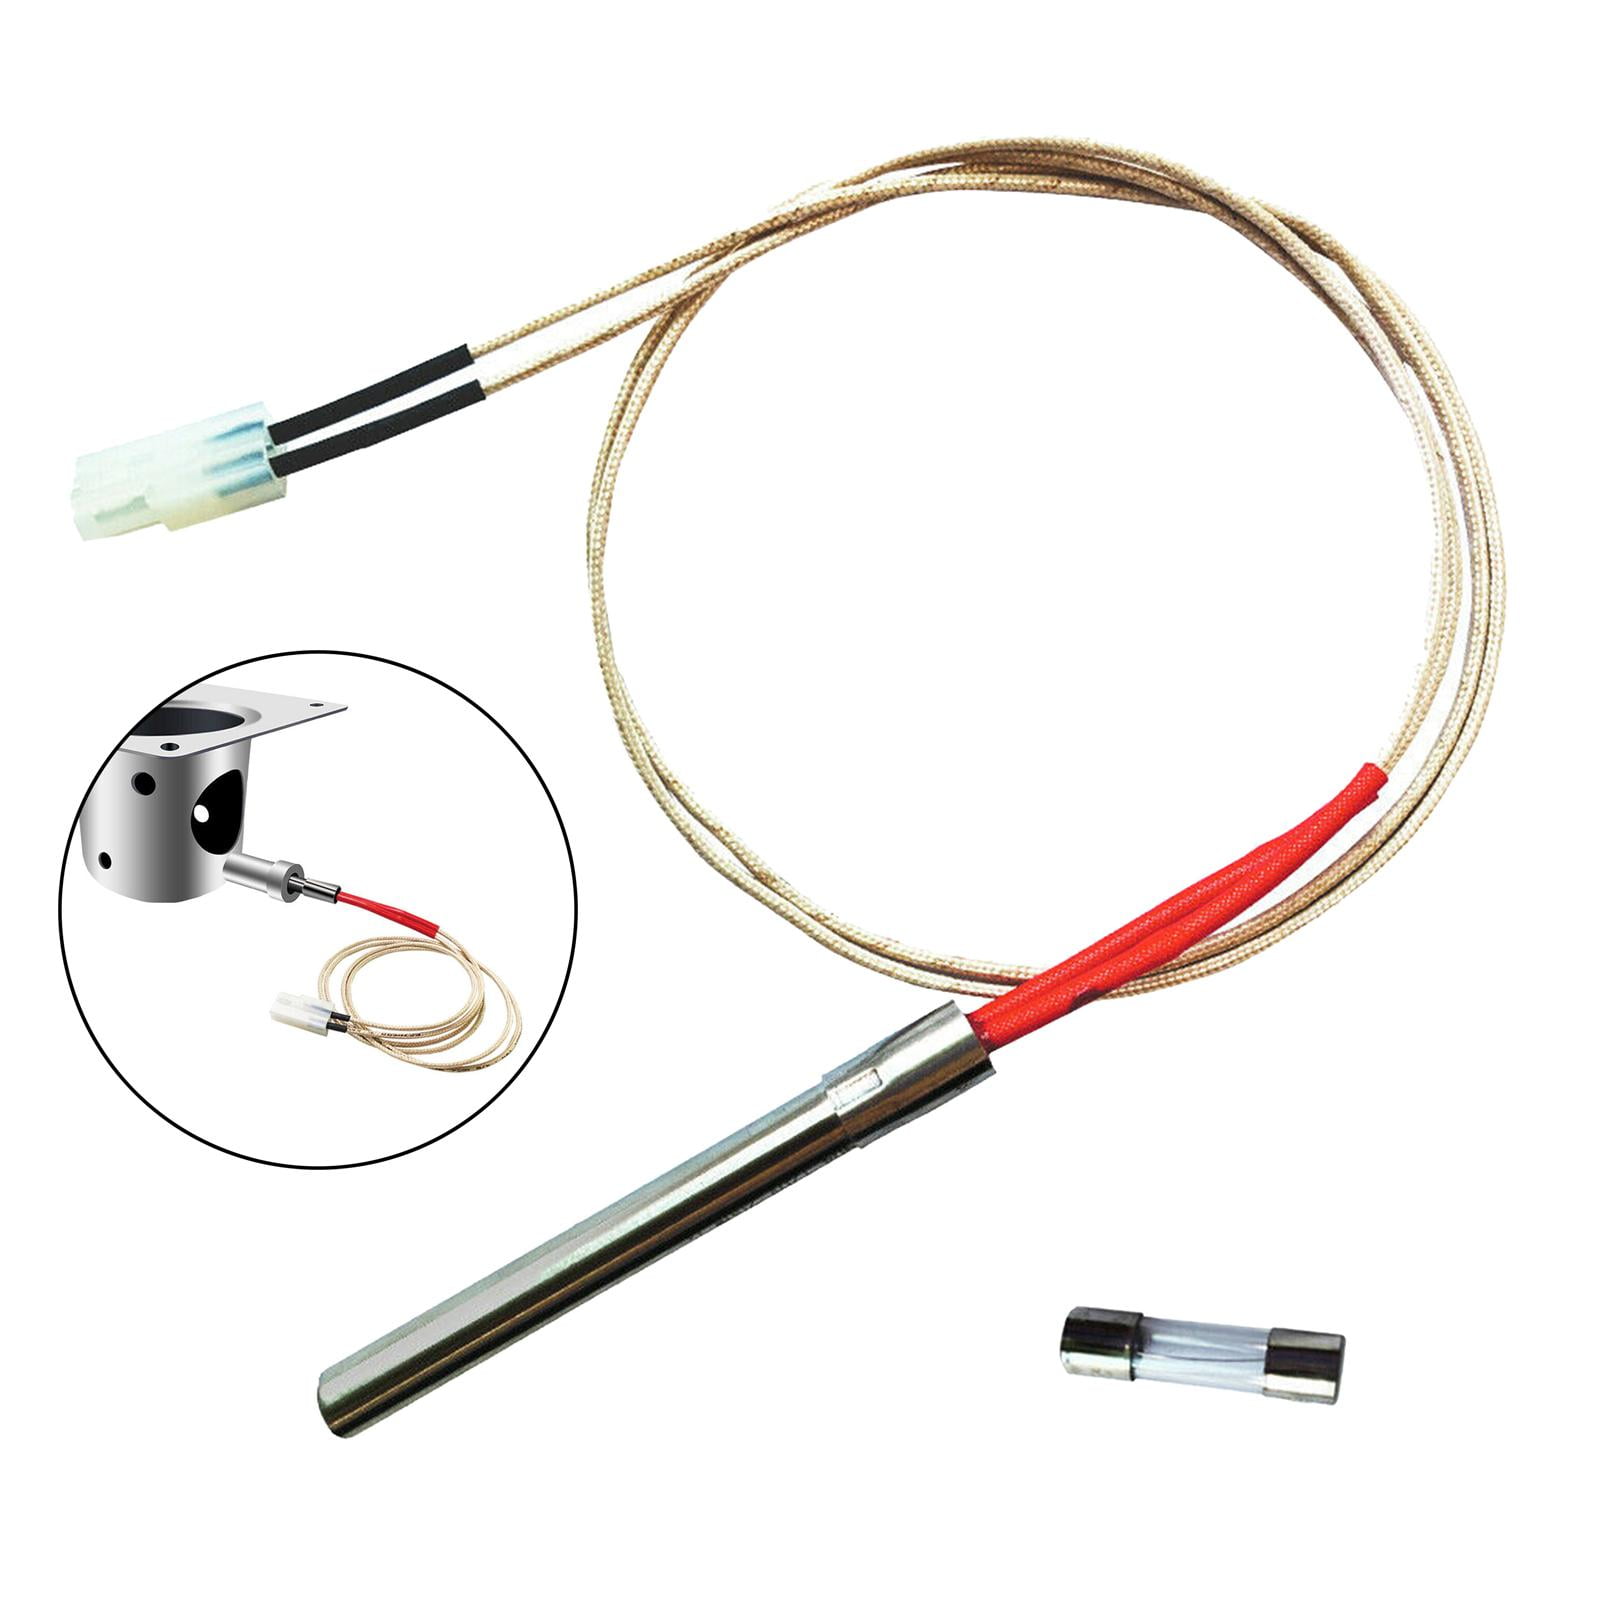 Compatible with All Traeger Grills Hot Rod Igniter Kit Replacement for Traeger Pellet Grills and Somkers BBQ Pro Parts Pit Boss Pellet Stove Grills 